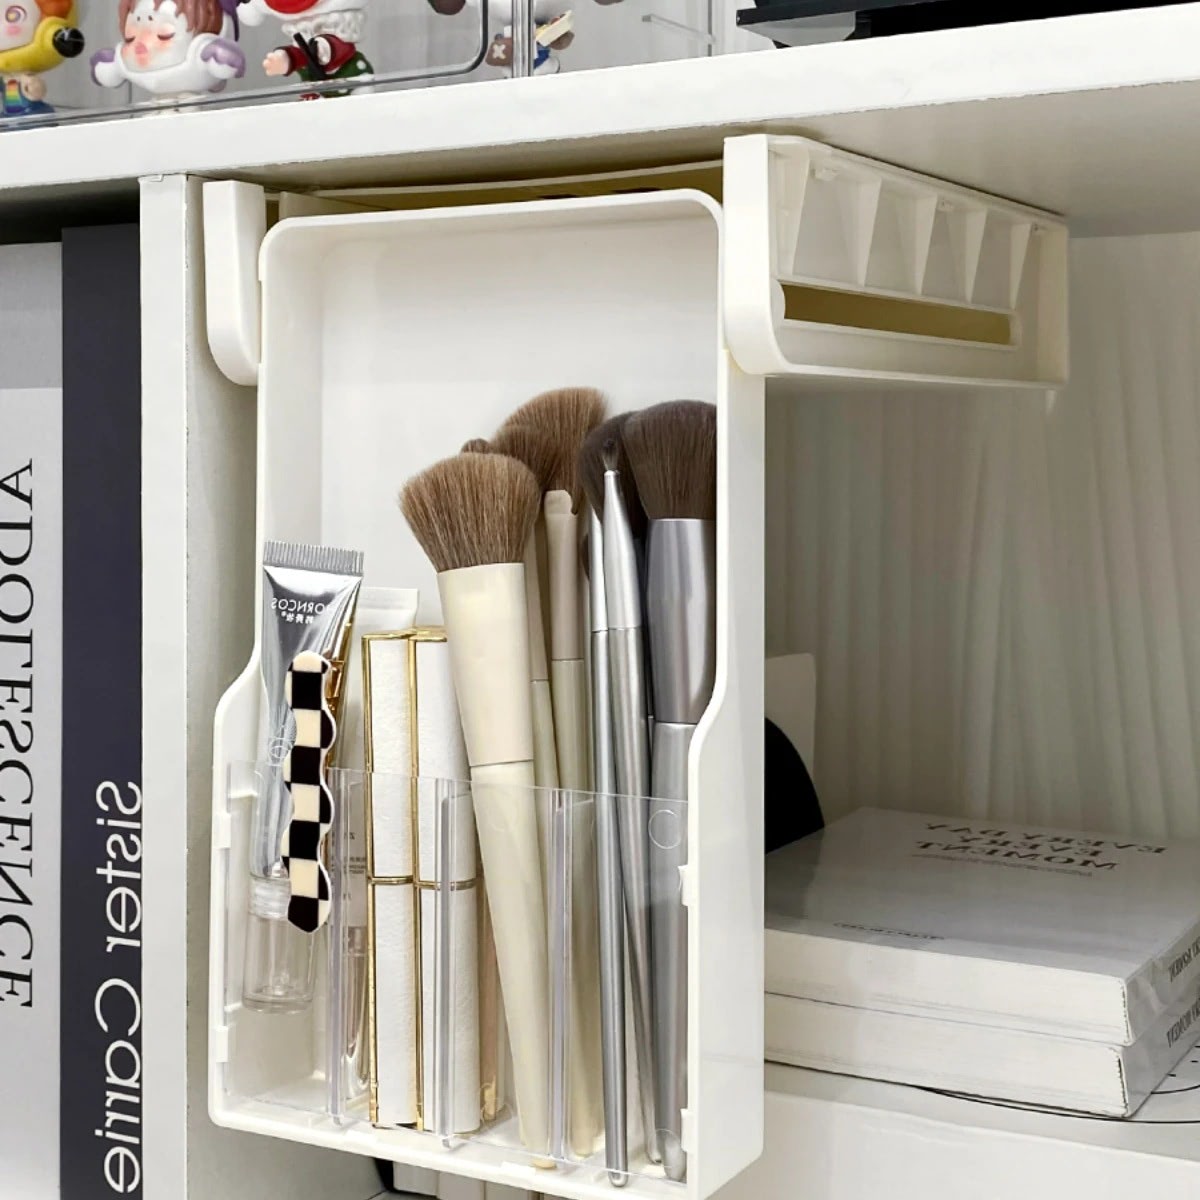 Under Table Stationary Storage Drawer - Shop Online on roomtery